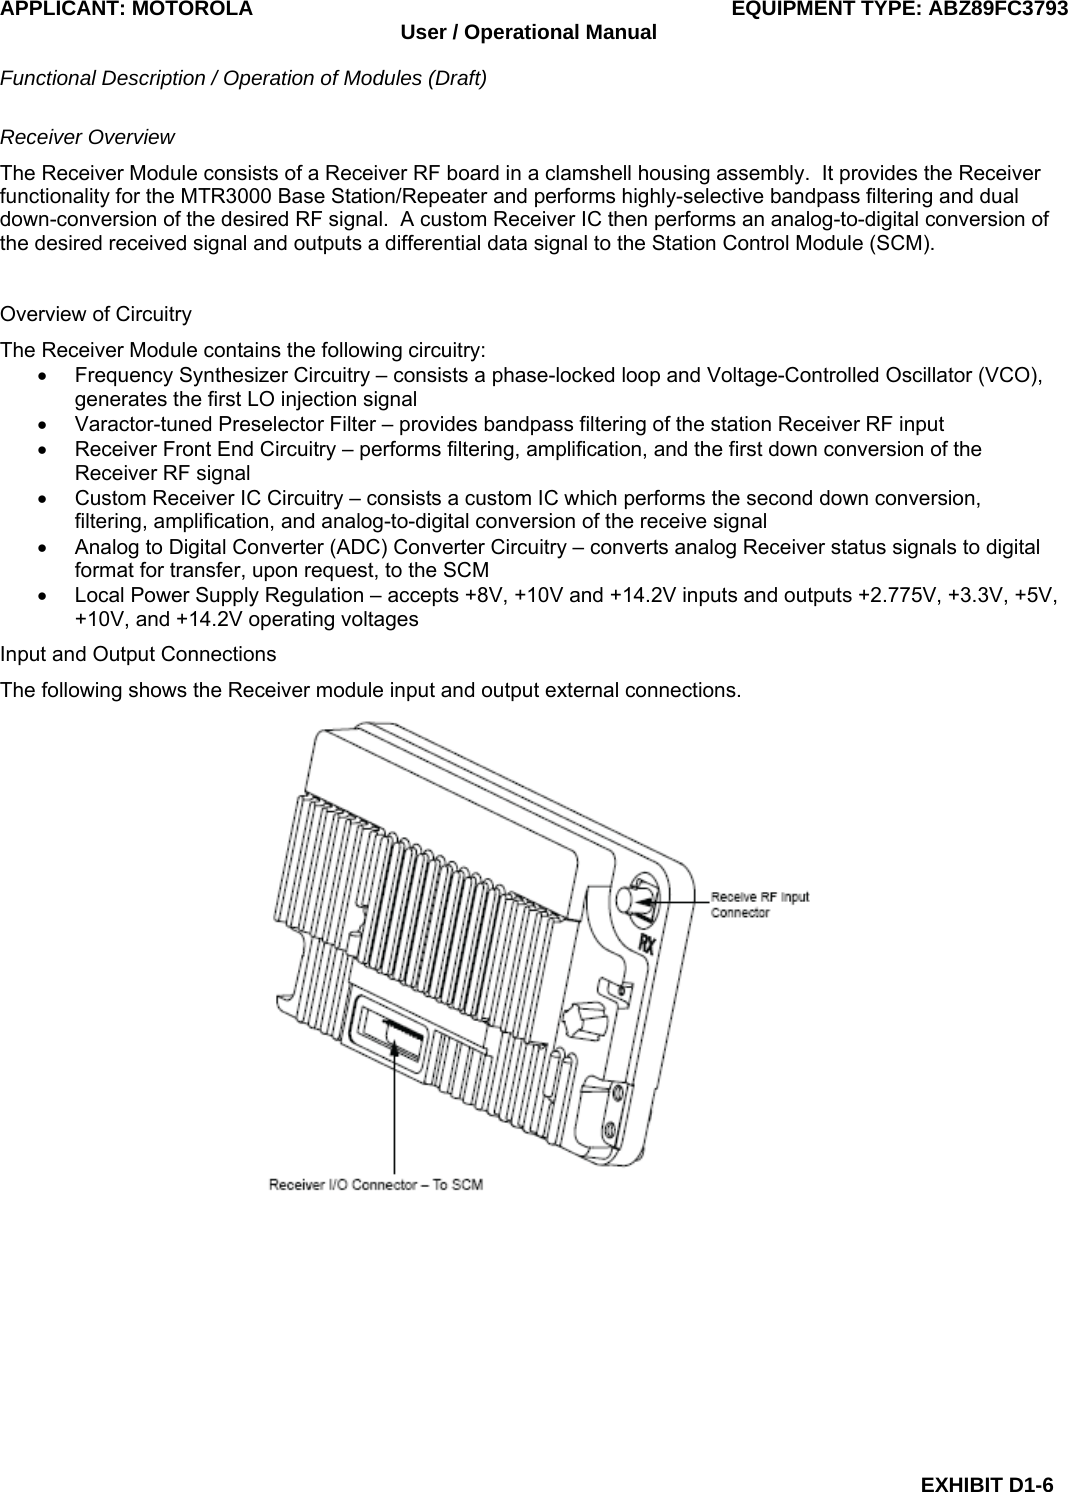 APPLICANT: MOTOROLA  EQUIPMENT TYPE: ABZ89FC3793 User / Operational Manual  Functional Description / Operation of Modules (Draft)  EXHIBIT D1-6 Receiver Overview The Receiver Module consists of a Receiver RF board in a clamshell housing assembly.  It provides the Receiver functionality for the MTR3000 Base Station/Repeater and performs highly-selective bandpass filtering and dual down-conversion of the desired RF signal.  A custom Receiver IC then performs an analog-to-digital conversion of the desired received signal and outputs a differential data signal to the Station Control Module (SCM).  Overview of Circuitry The Receiver Module contains the following circuitry: •  Frequency Synthesizer Circuitry – consists a phase-locked loop and Voltage-Controlled Oscillator (VCO), generates the first LO injection signal •  Varactor-tuned Preselector Filter – provides bandpass filtering of the station Receiver RF input •  Receiver Front End Circuitry – performs filtering, amplification, and the first down conversion of the Receiver RF signal •  Custom Receiver IC Circuitry – consists a custom IC which performs the second down conversion, filtering, amplification, and analog-to-digital conversion of the receive signal •  Analog to Digital Converter (ADC) Converter Circuitry – converts analog Receiver status signals to digital format for transfer, upon request, to the SCM •  Local Power Supply Regulation – accepts +8V, +10V and +14.2V inputs and outputs +2.775V, +3.3V, +5V, +10V, and +14.2V operating voltages Input and Output Connections The following shows the Receiver module input and output external connections.  